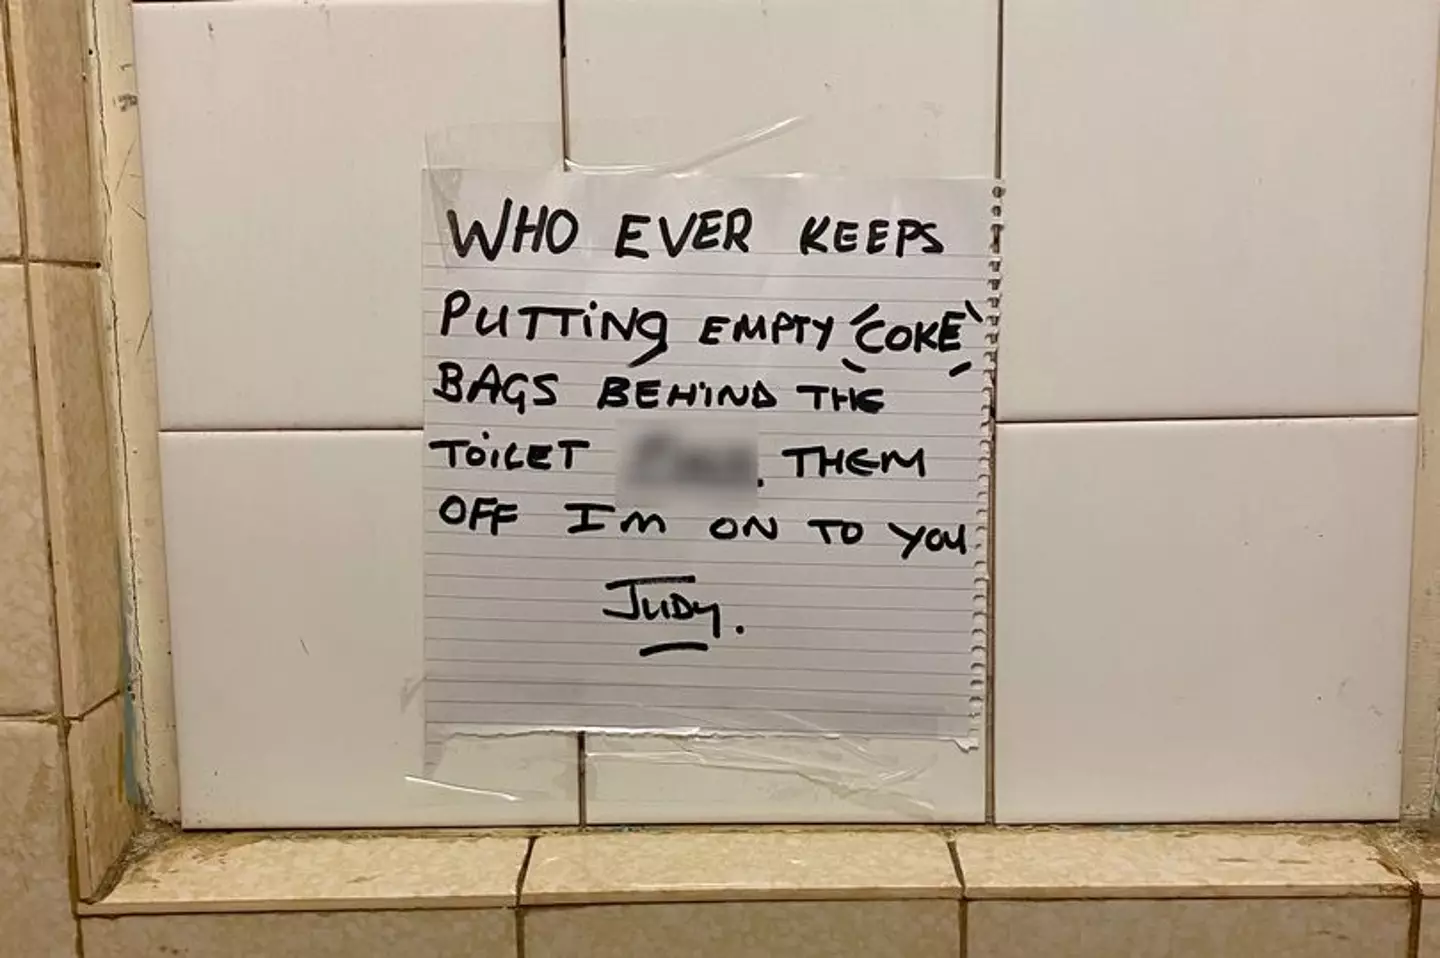 The note warns drug users in no uncertain terms.